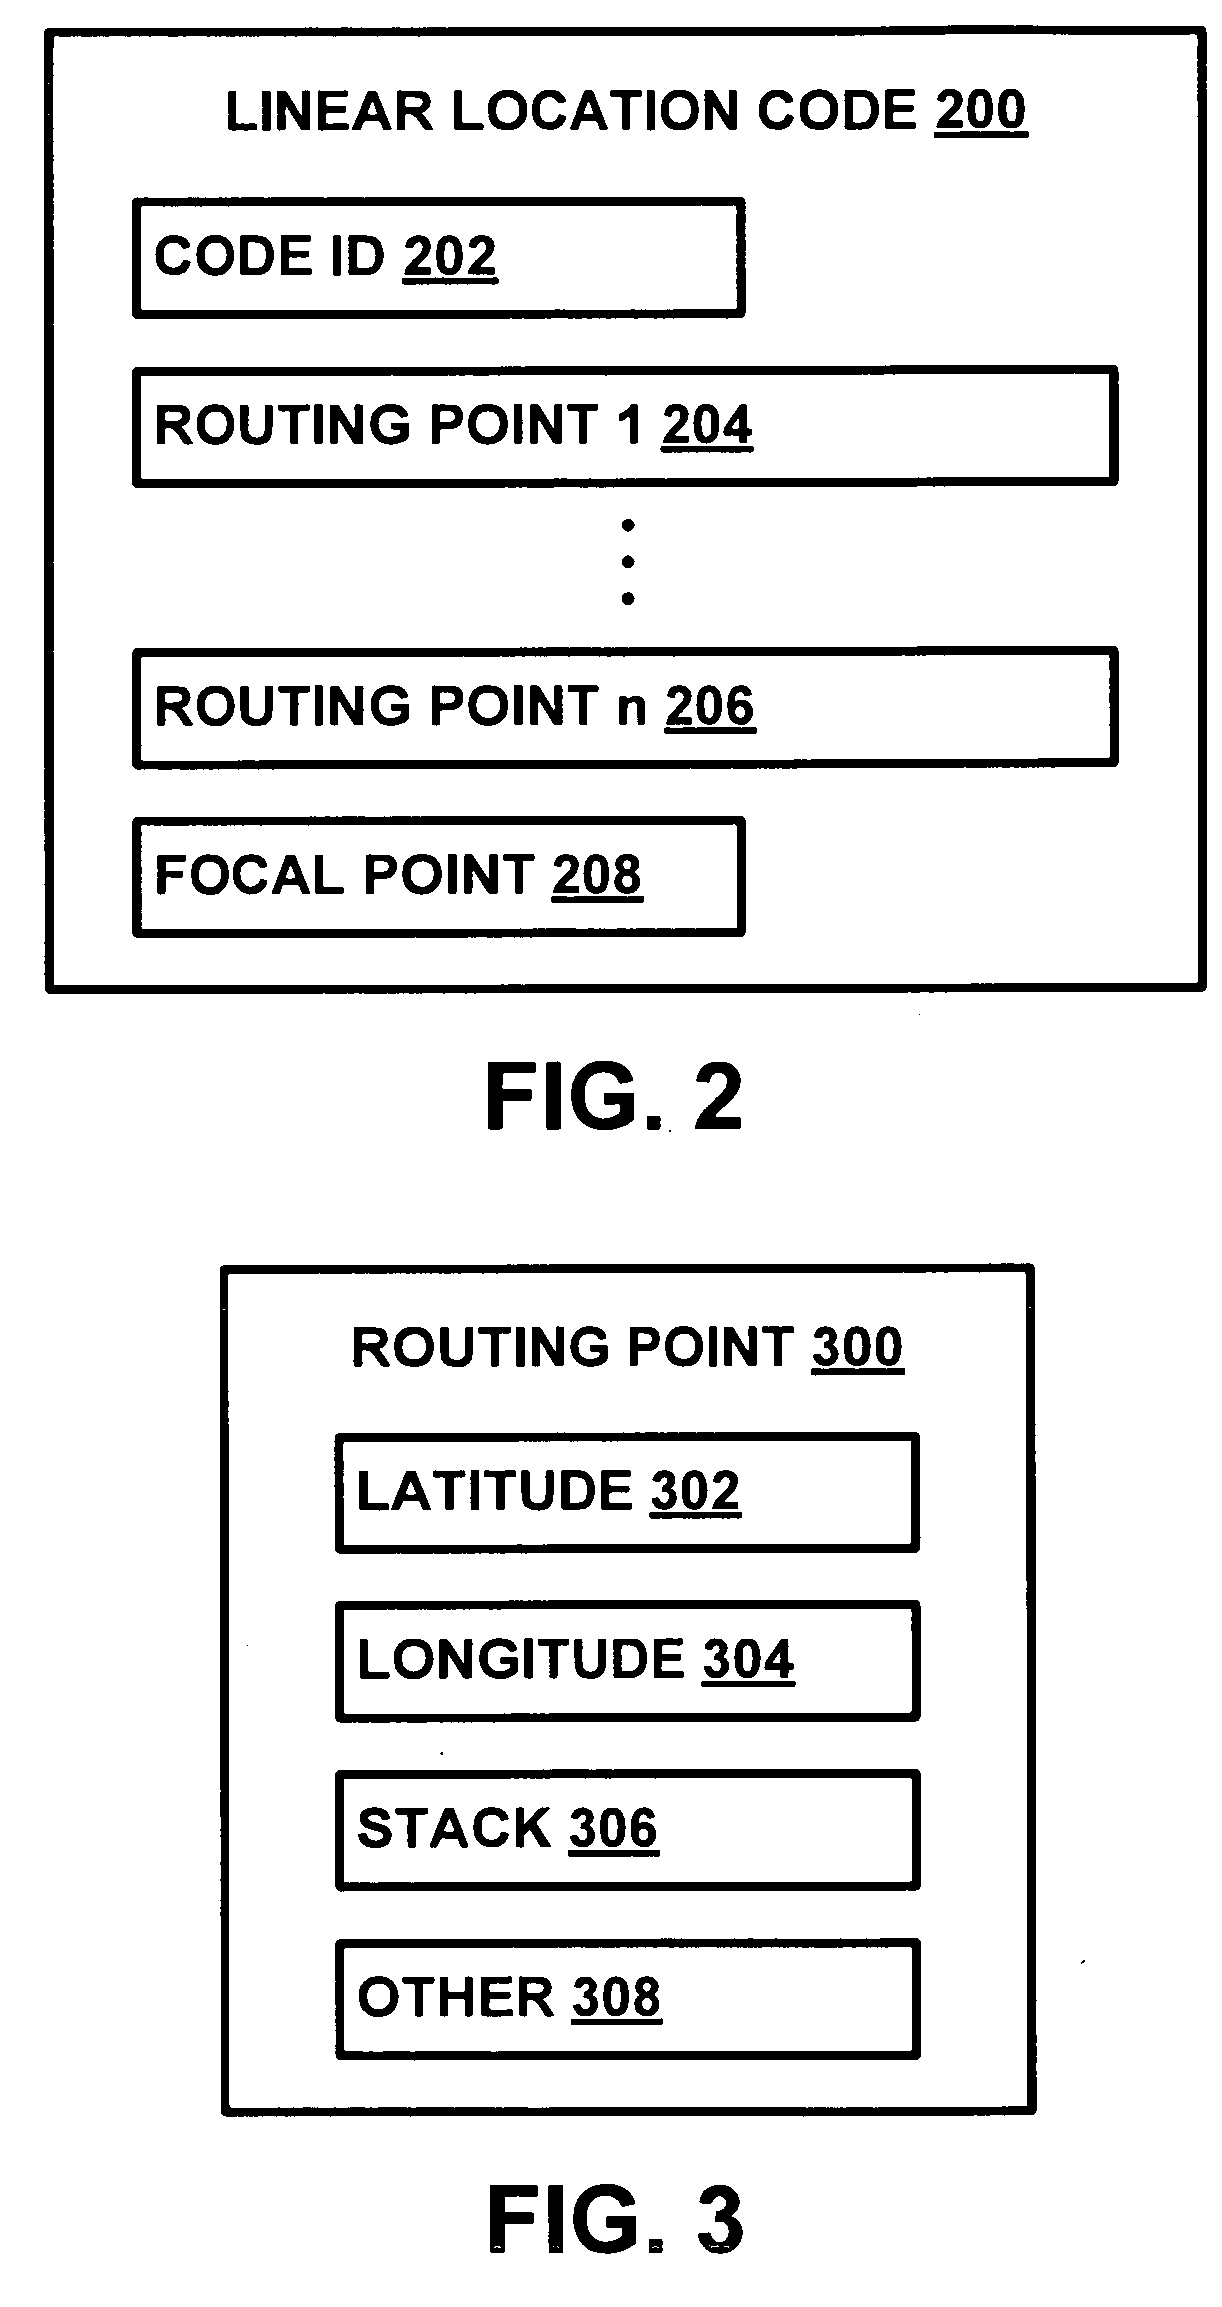 Method for Representing Linear Features in a Location Content Management System